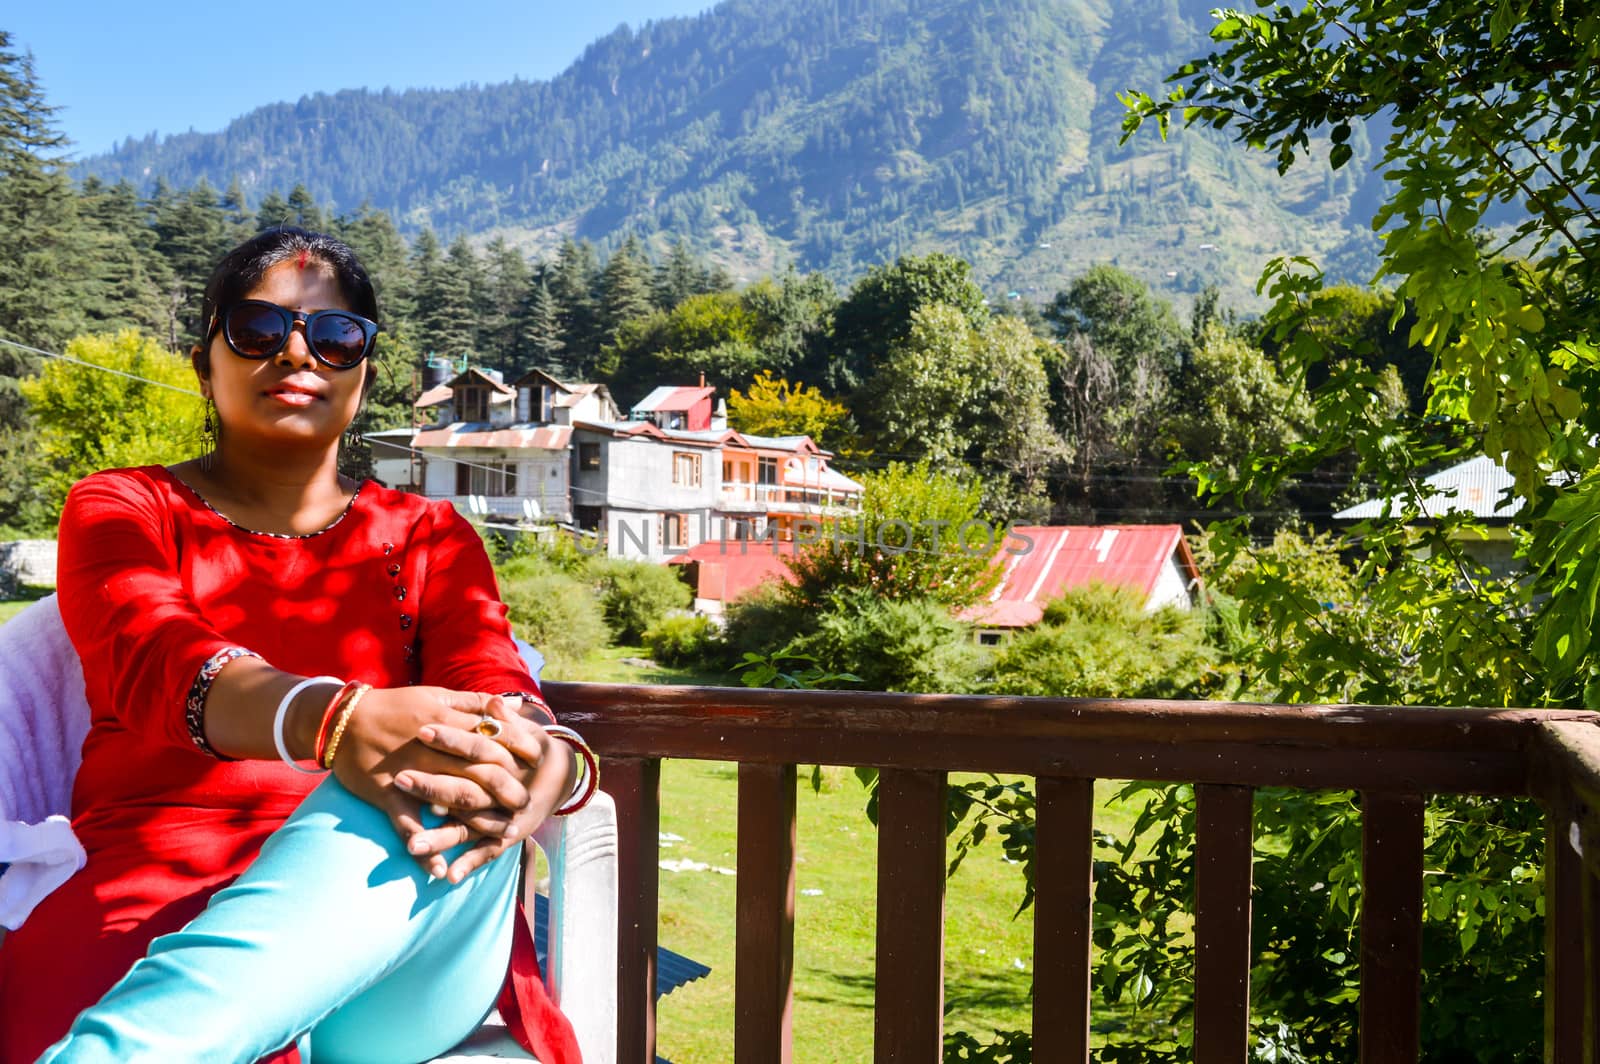 A lady resting or relaxing in balcony of a luxury resort bungalow in morning in the heart of Manali City, Himachal Pradesh, Kullu, India. It is a popular tourist destination in northern India. by sudiptabhowmick